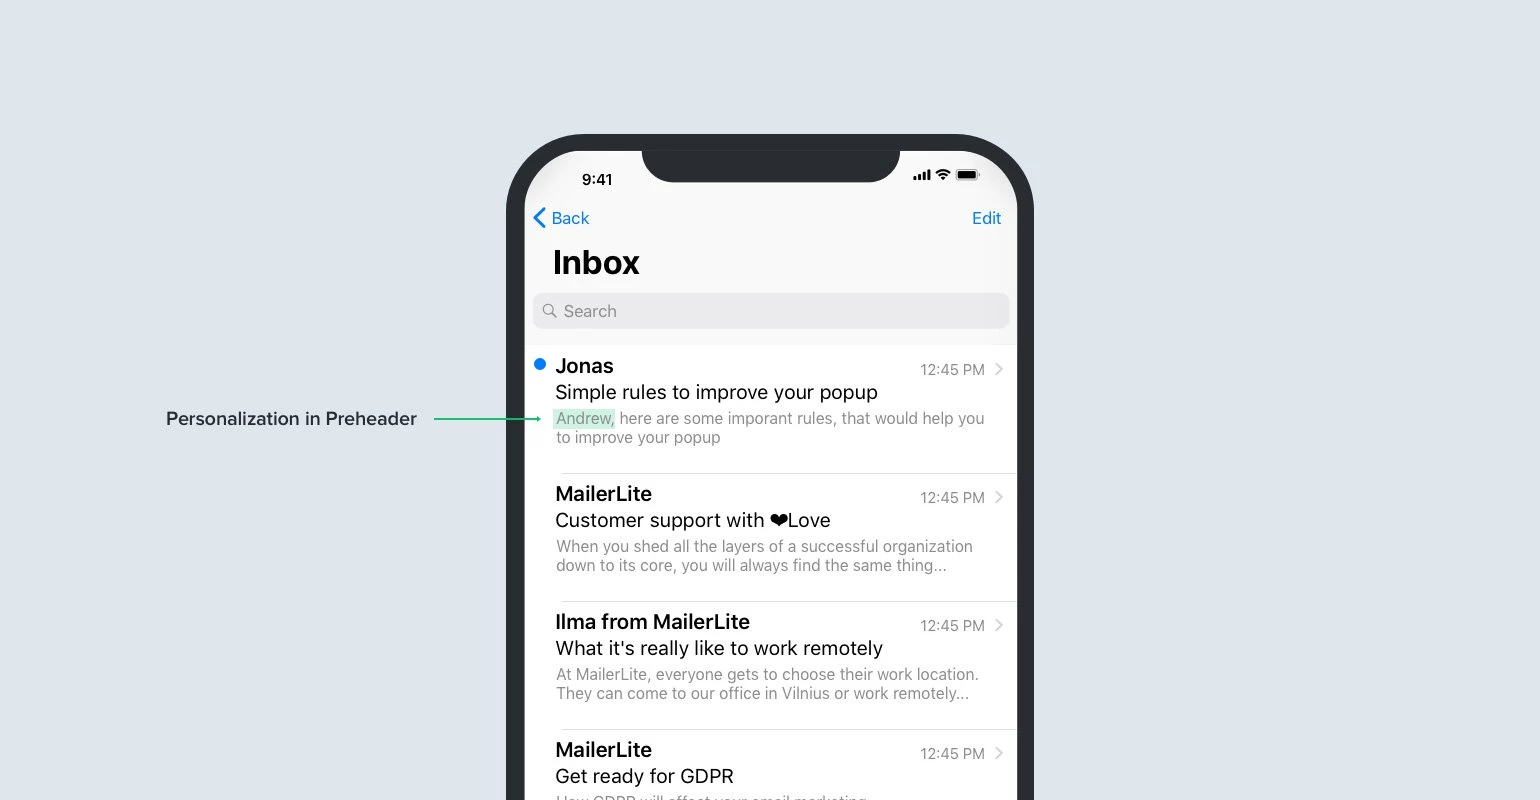 Personalized email preheader in a mobile inbox